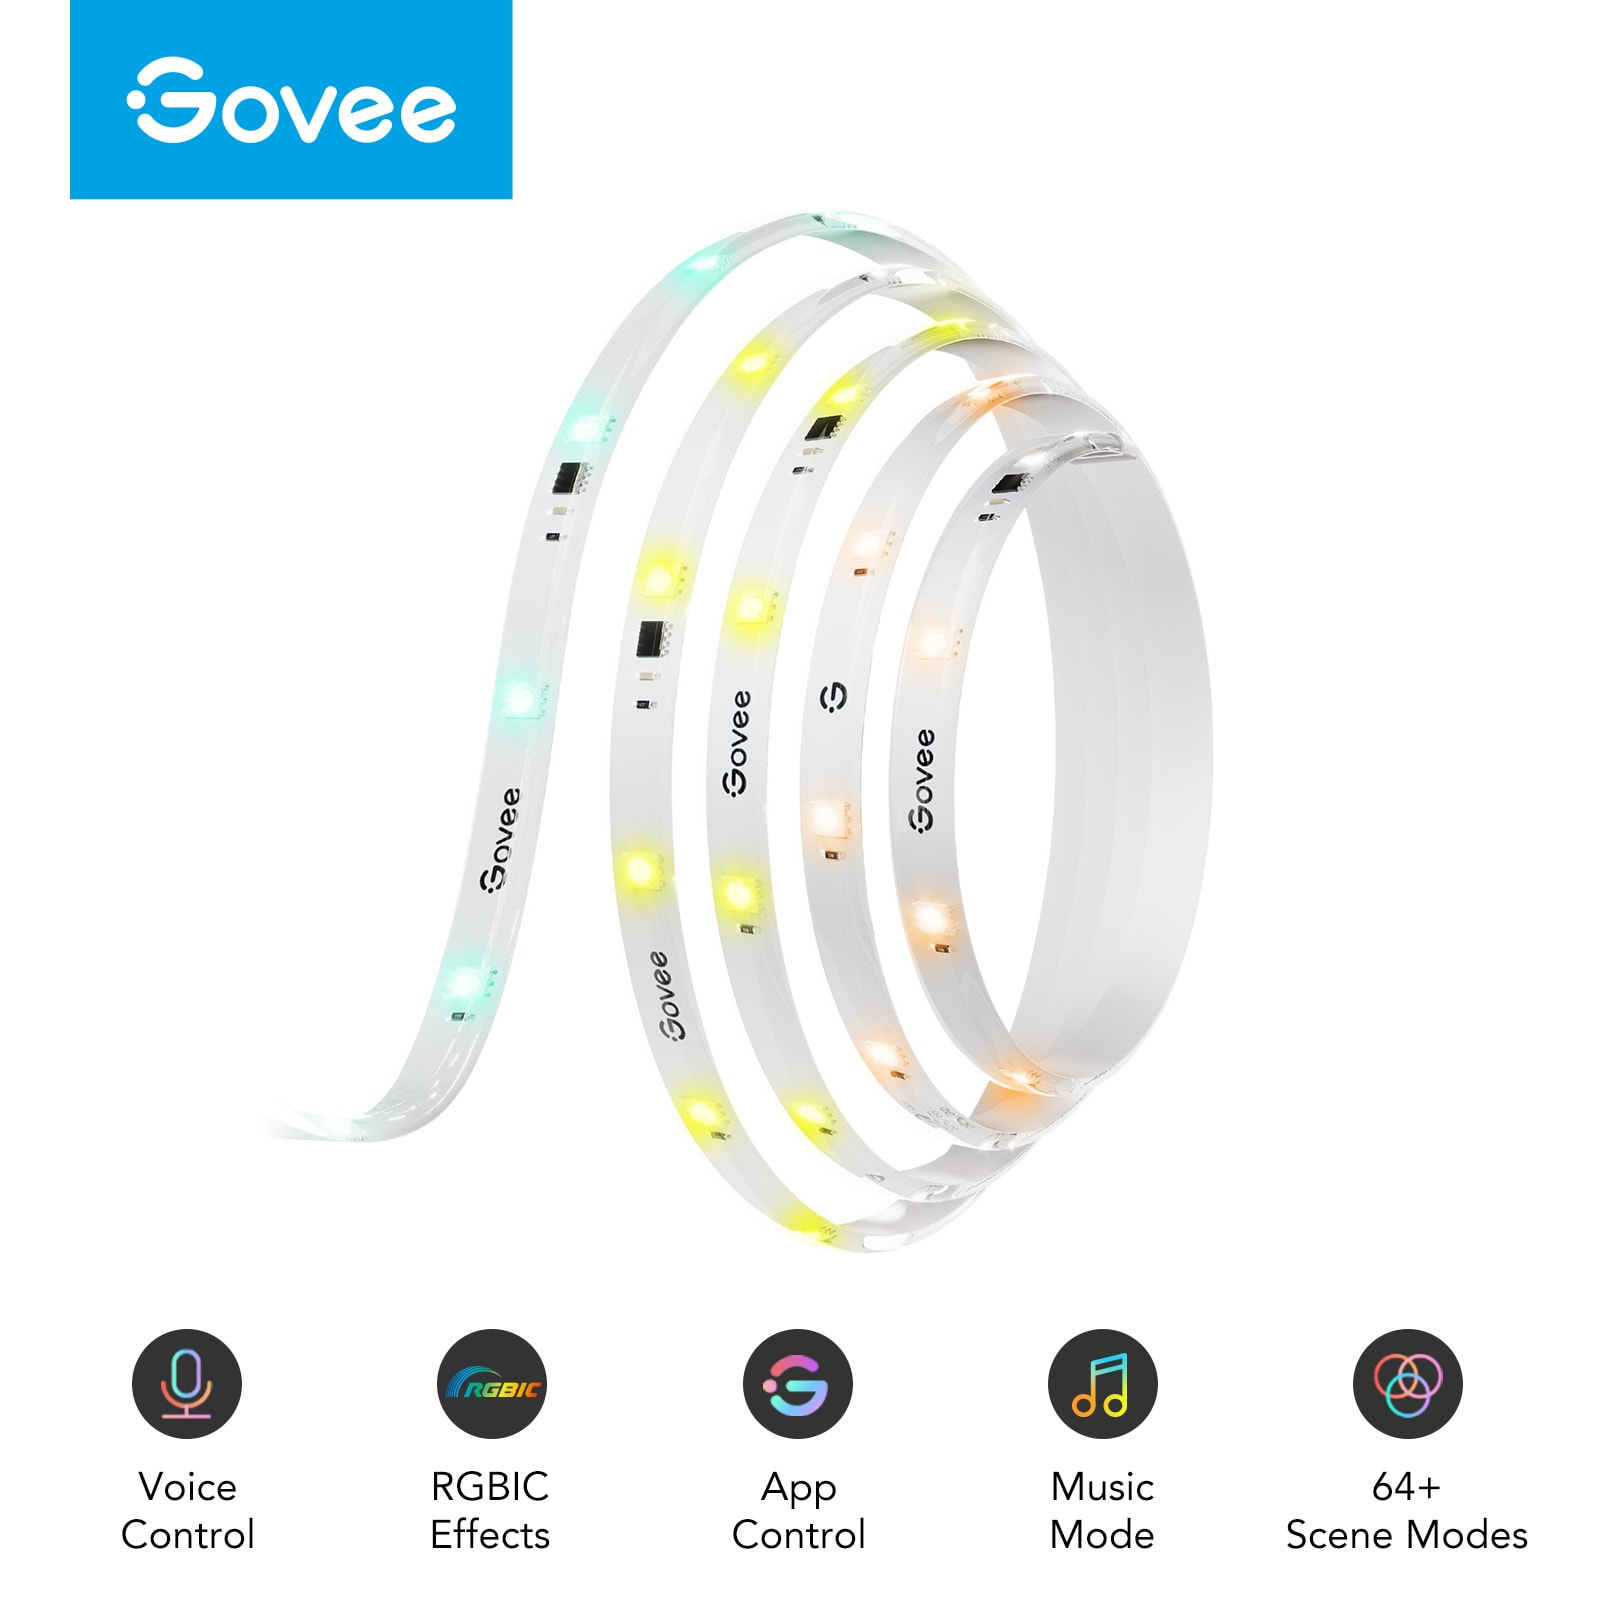 Govee Wi-Fi smart plugs automate lights for $30, more